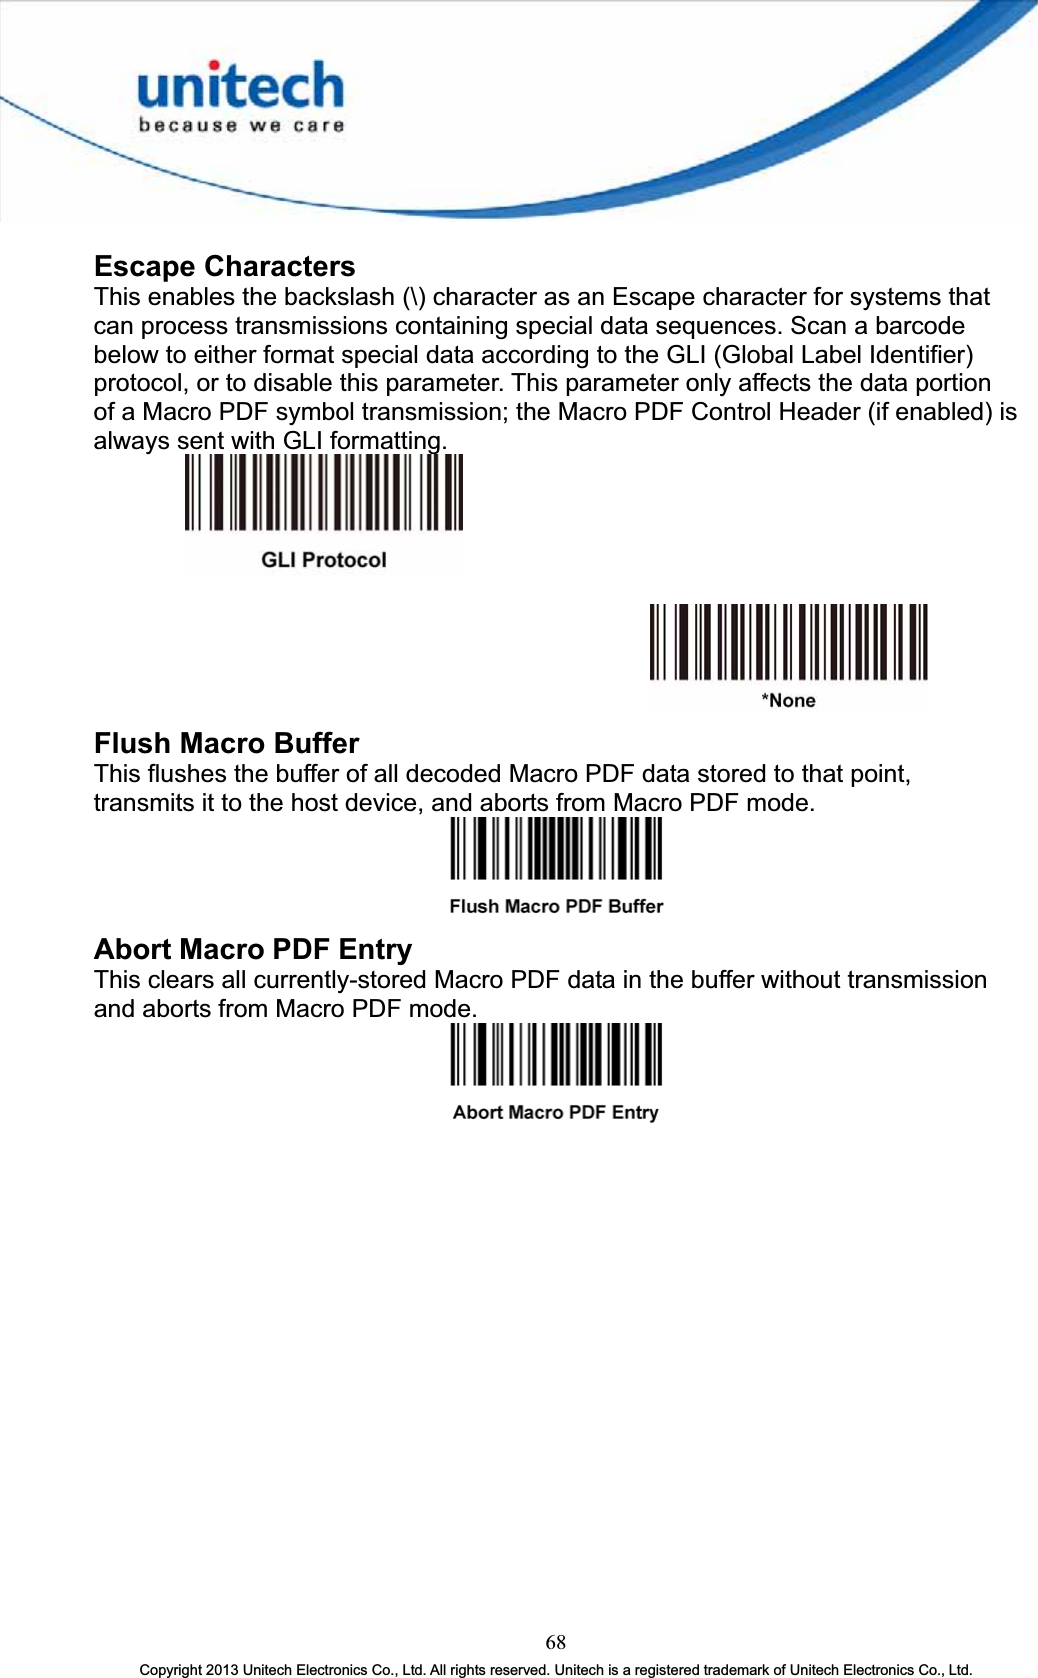 Escape Characters This enables the backslash (\) character as an Escape character for systems that can process transmissions containing special data sequences. Scan a barcode below to either format special data according to the GLI (Global Label Identifier) protocol, or to disable this parameter. This parameter only affects the data portion of a Macro PDF symbol transmission; the Macro PDF Control Header (if enabled) is always sent with GLI formatting. Flush Macro Buffer This flushes the buffer of all decoded Macro PDF data stored to that point, transmits it to the host device, and aborts from Macro PDF mode. Abort Macro PDF Entry This clears all currently-stored Macro PDF data in the buffer without transmission and aborts from Macro PDF mode. 68Copyright 2013 Unitech Electronics Co., Ltd. All rights reserved. Unitech is a registered trademark of Unitech Electronics Co., Ltd. 